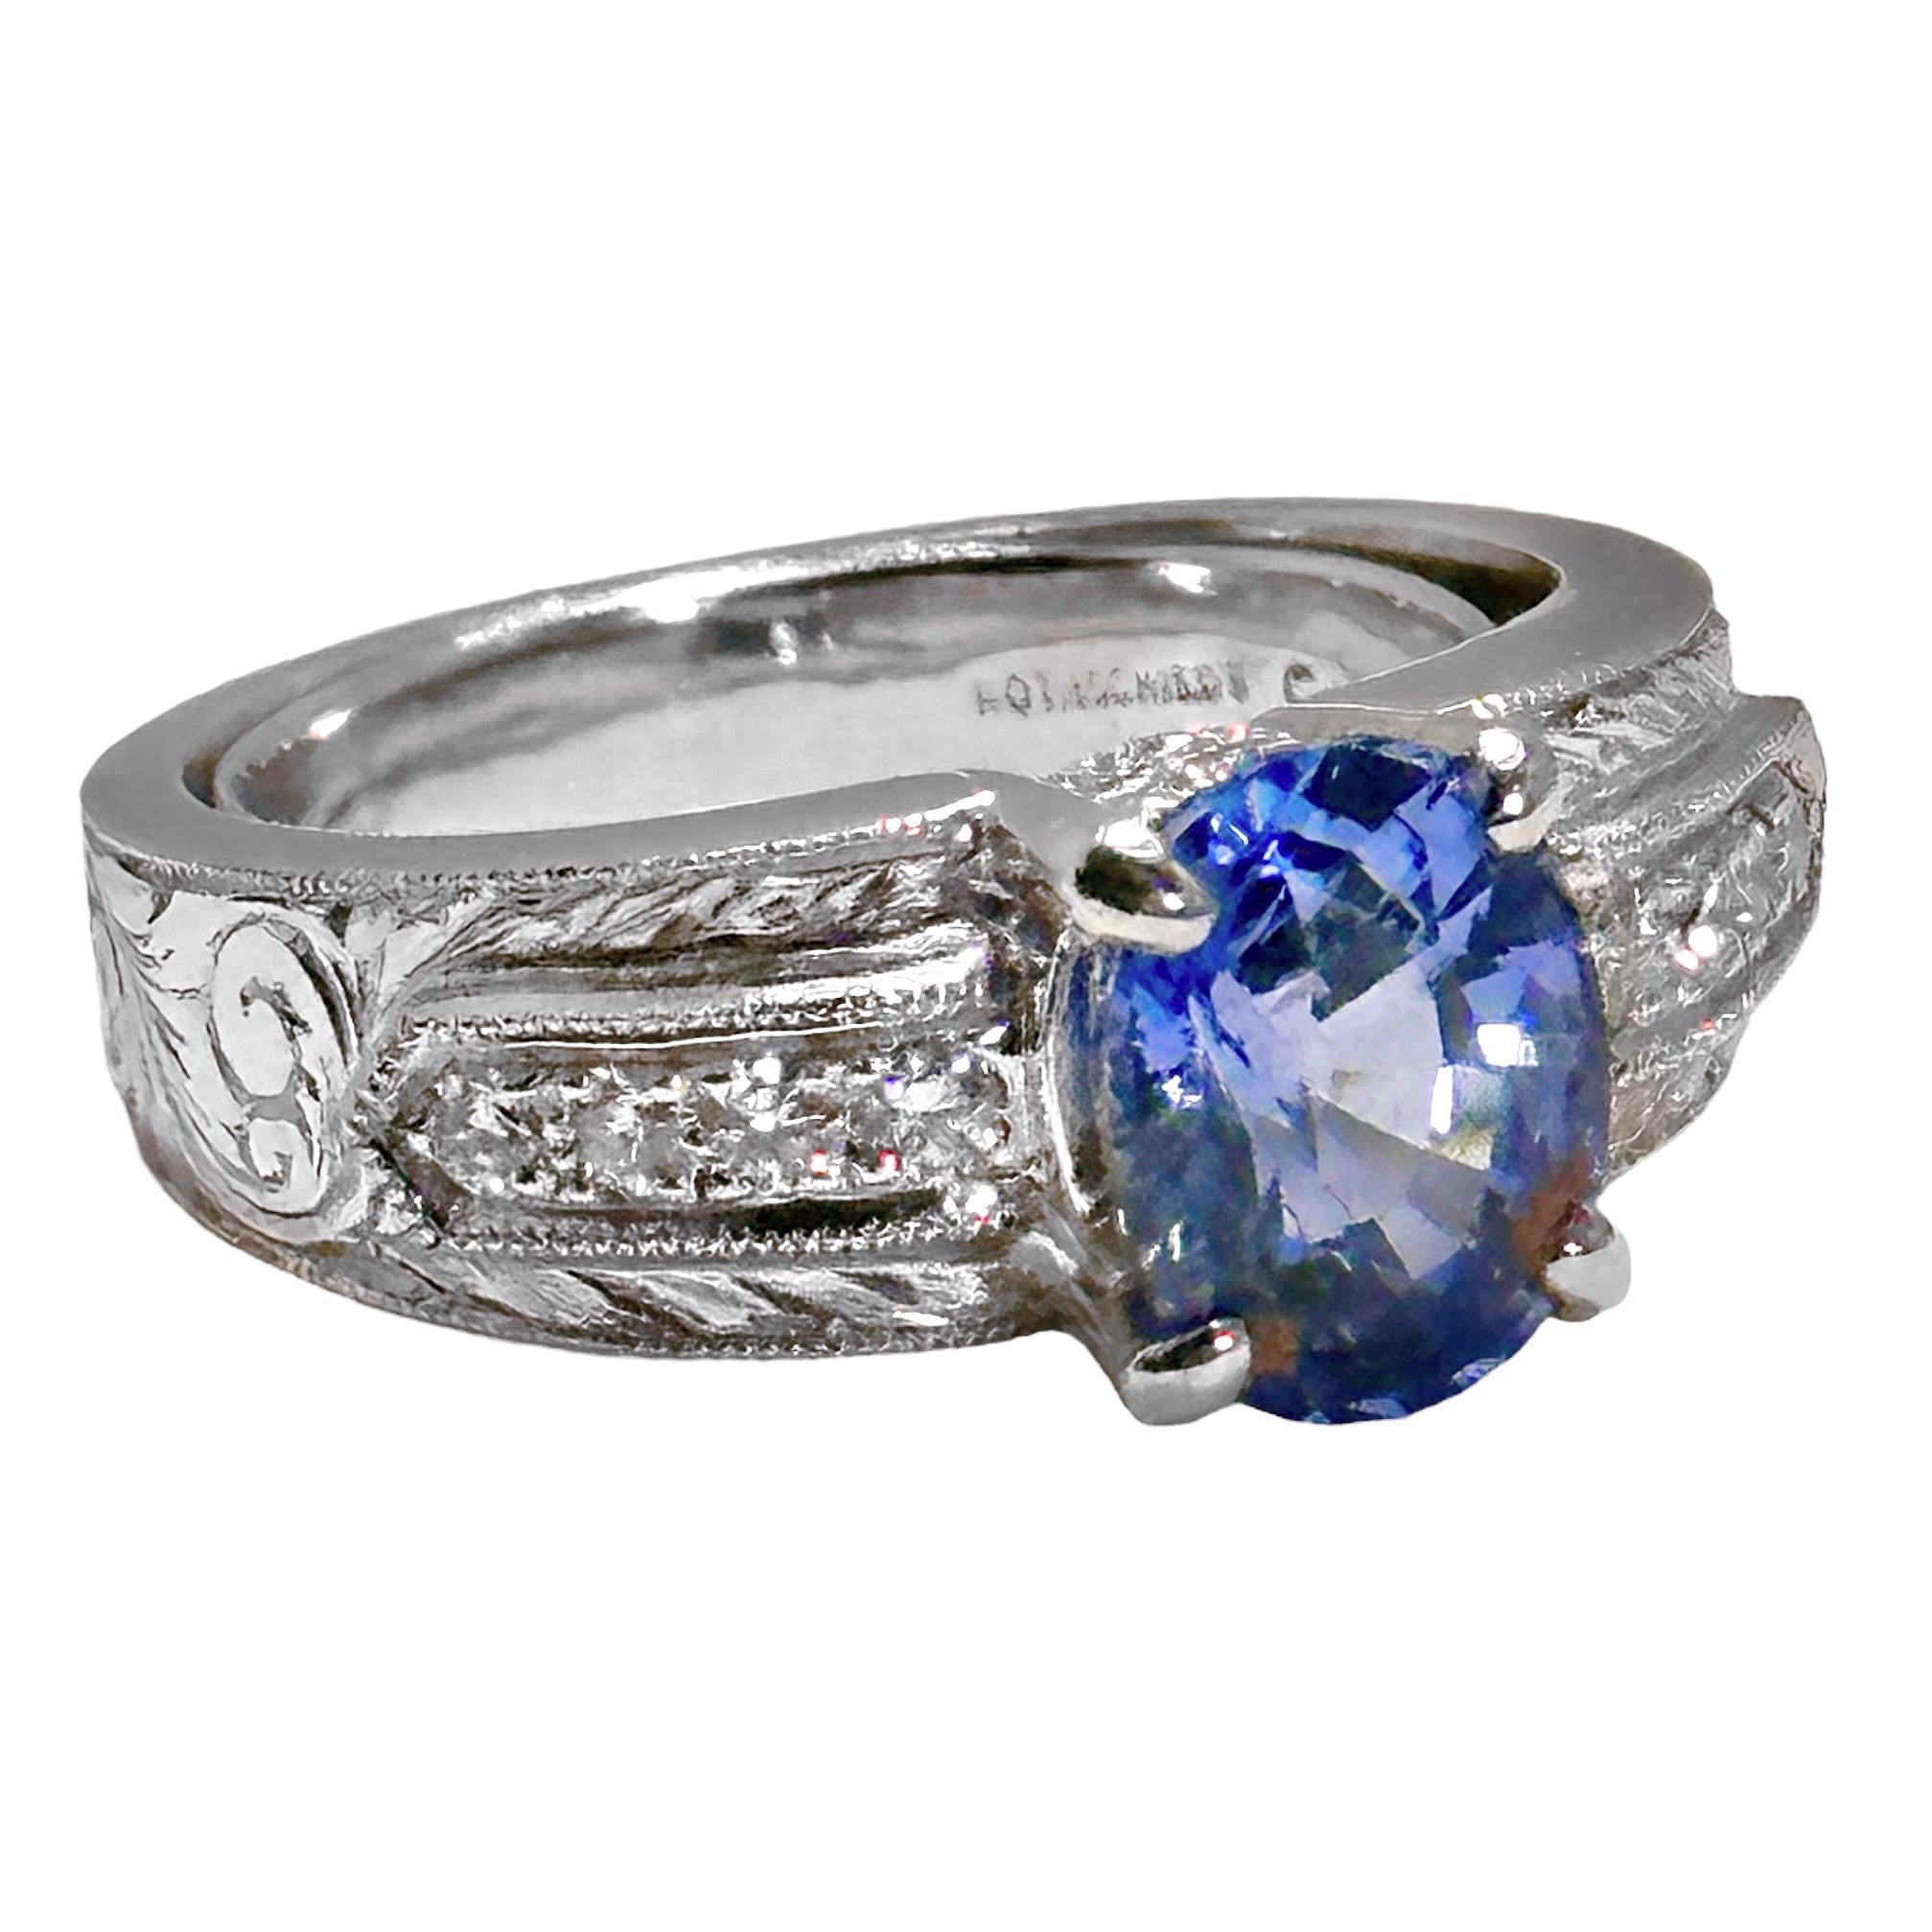 Mid-20th Century Hand Engraved Platinum, Sapphire, and Diamond Cocktail Ring For Sale 1